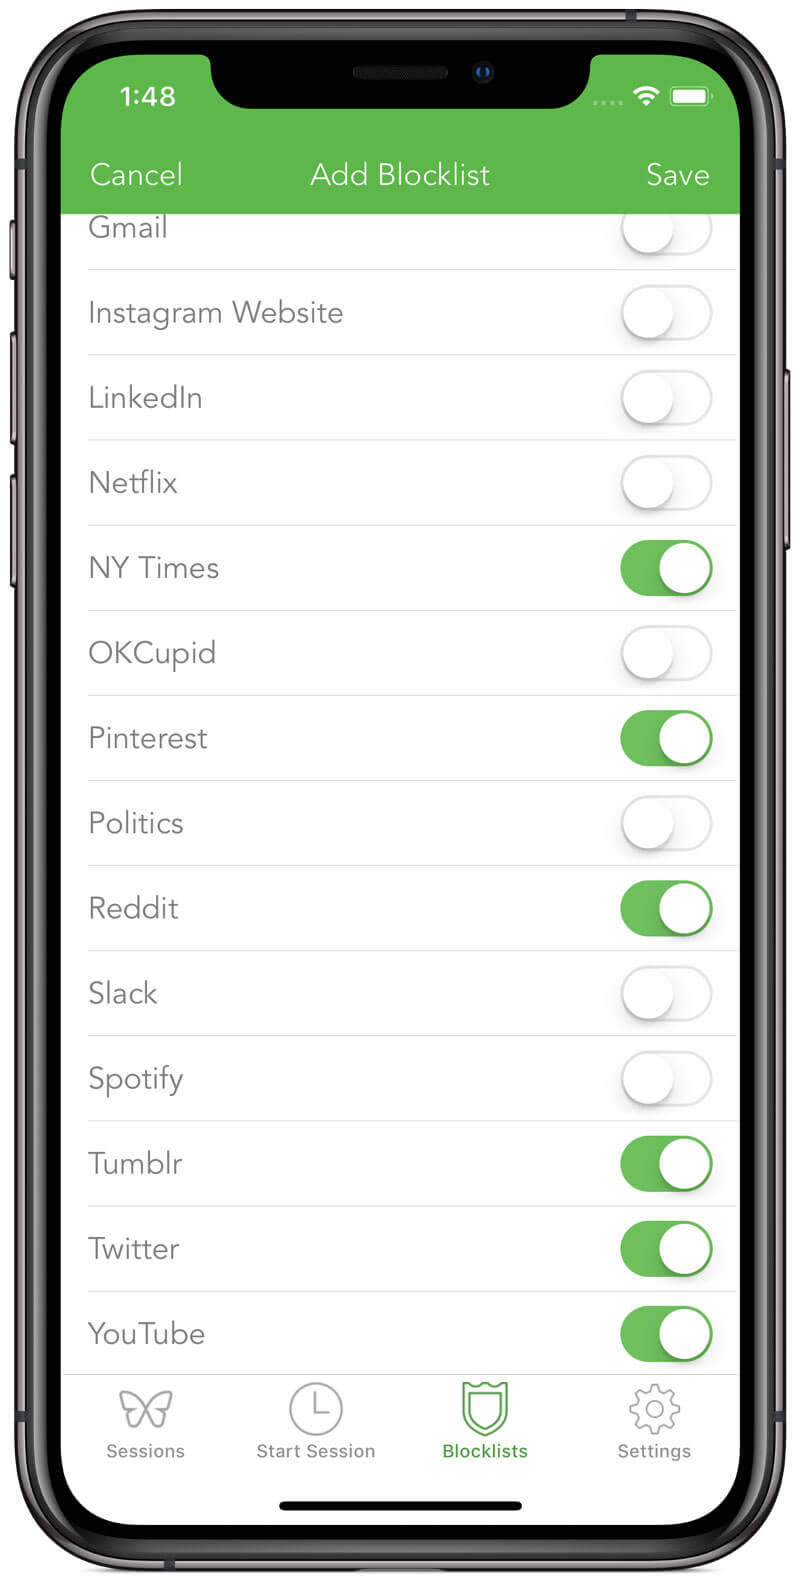 A screenshot showing a diverse list of distractions including Pinterest, Politics, Reddit, and New York Times, with a toggle button to add or remove them from a custom blocklist.